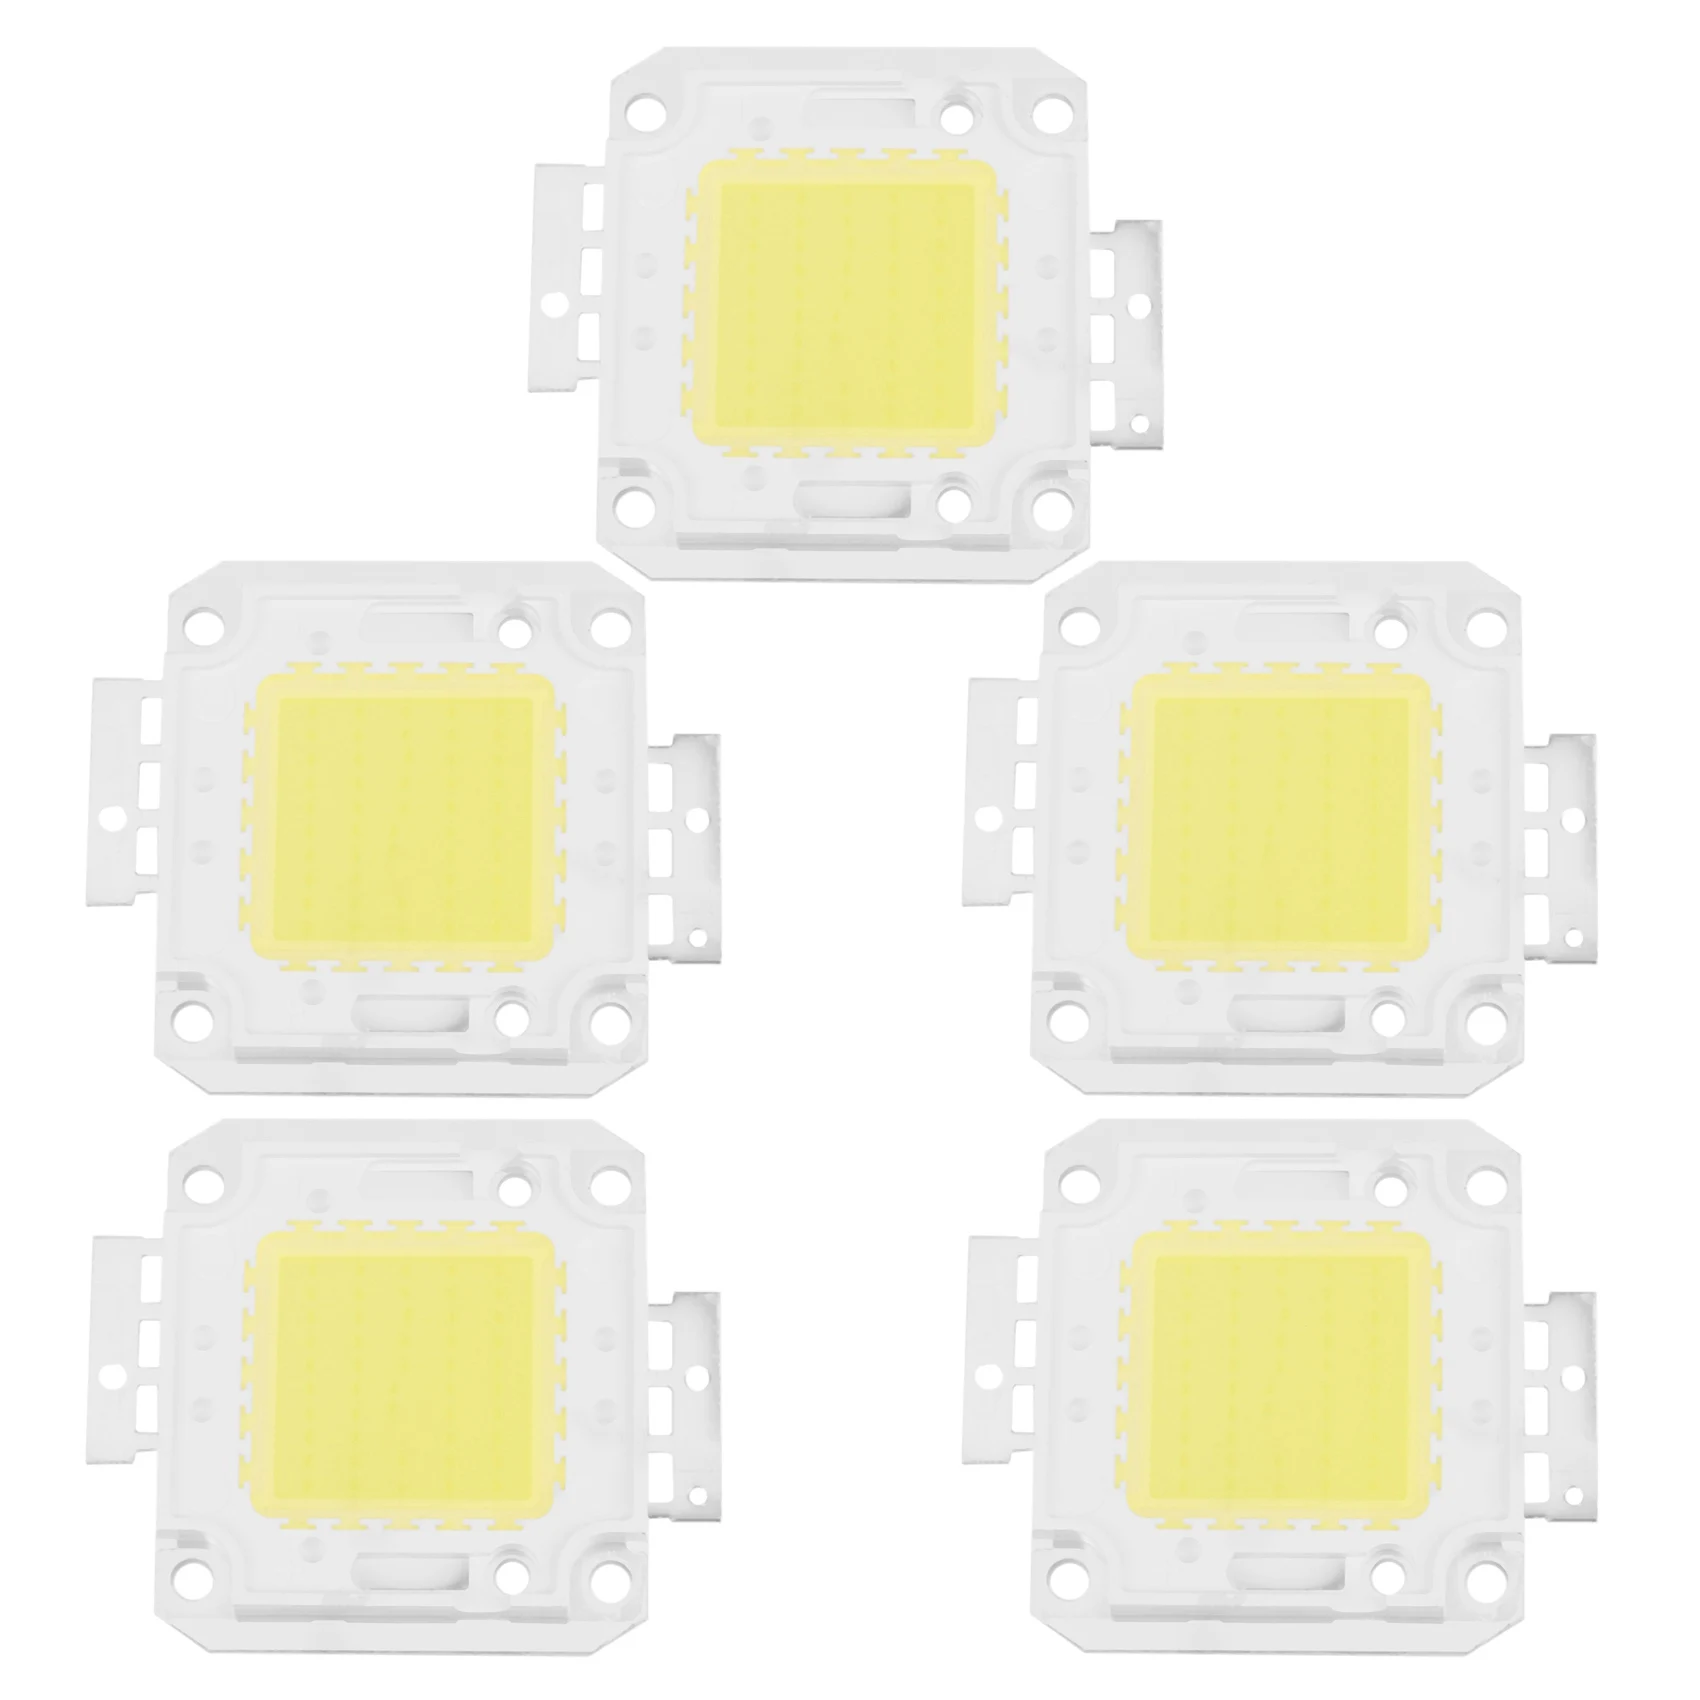 

5X 50W LED Driver Waterproof IP67 Power Supply High Power Adapter + 50W LED Chip Bulb Energy Saving for DIY Daylight